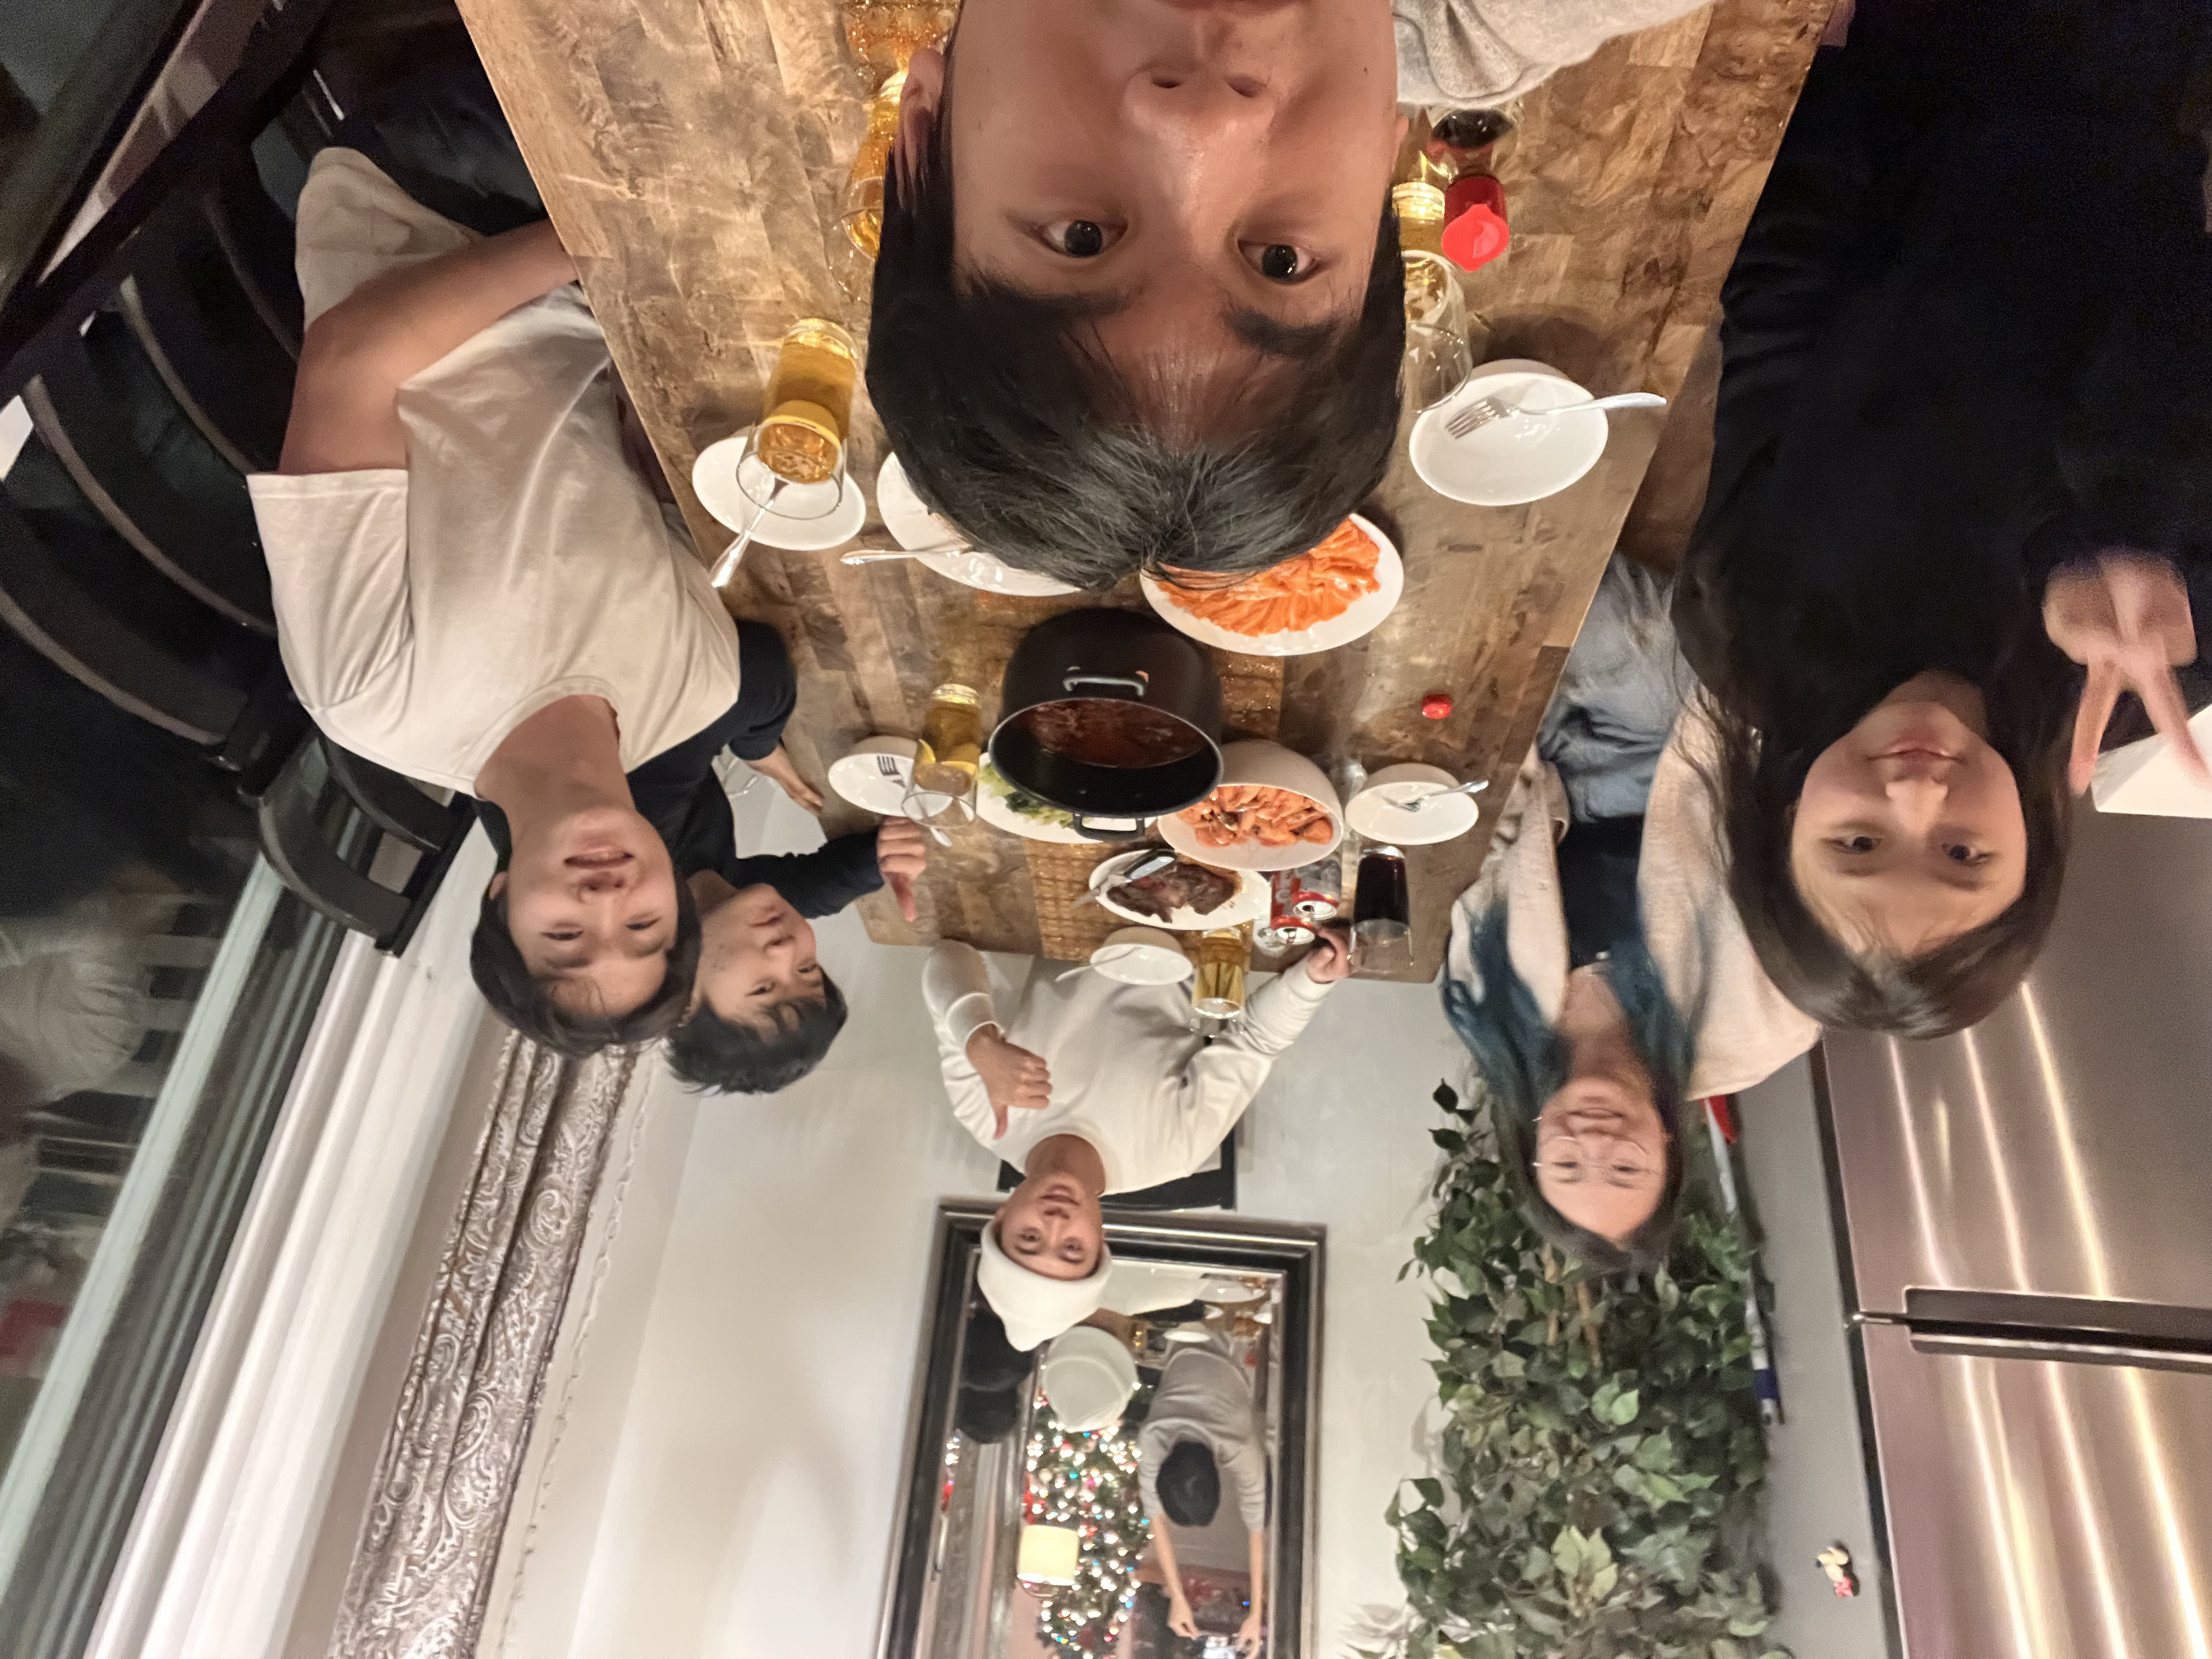 Selfie taken with 6 students in frame at a dining table with food set up.